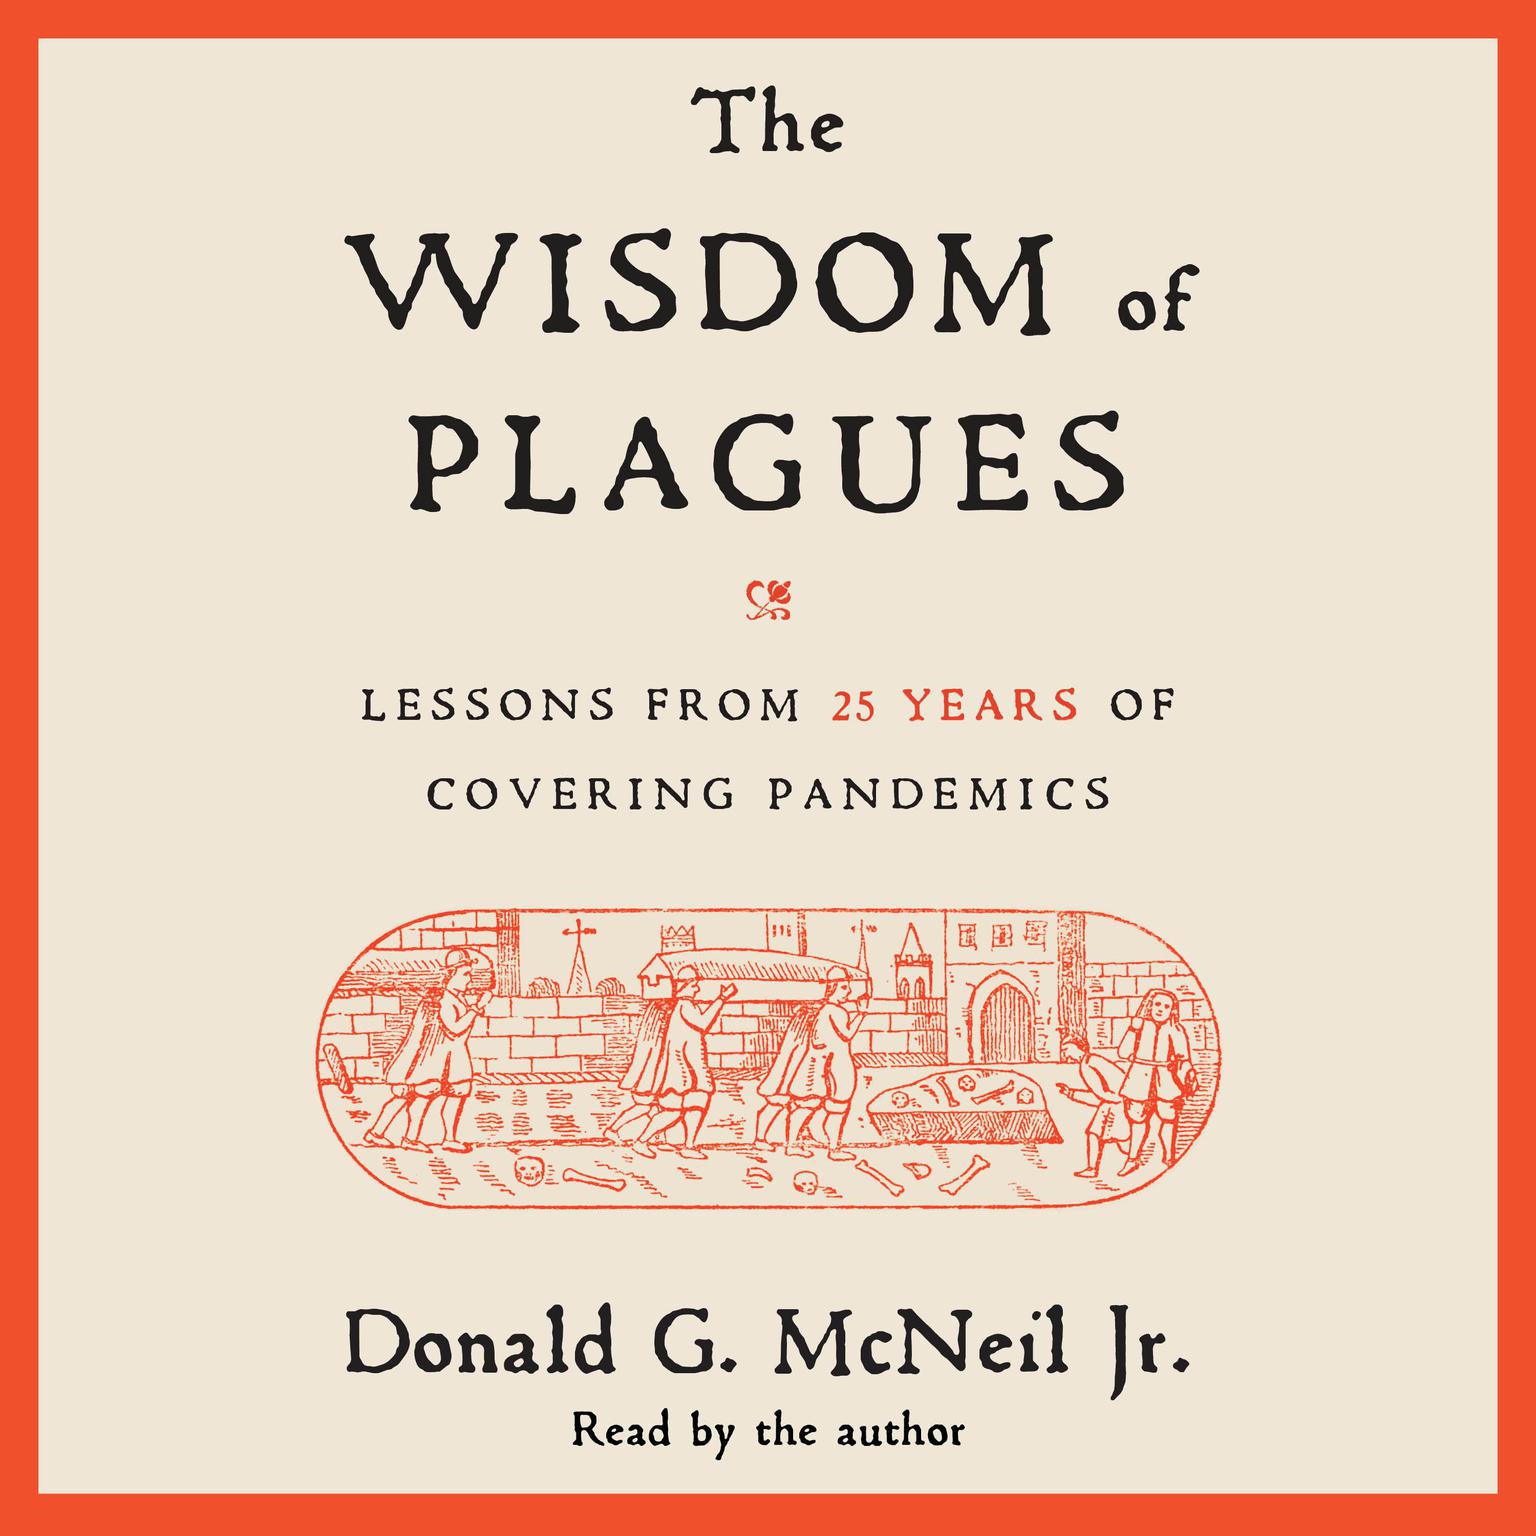 The Wisdom of Plagues: Lessons from 25 Years of Covering Pandemics Audiobook, by Donald G. McNeil